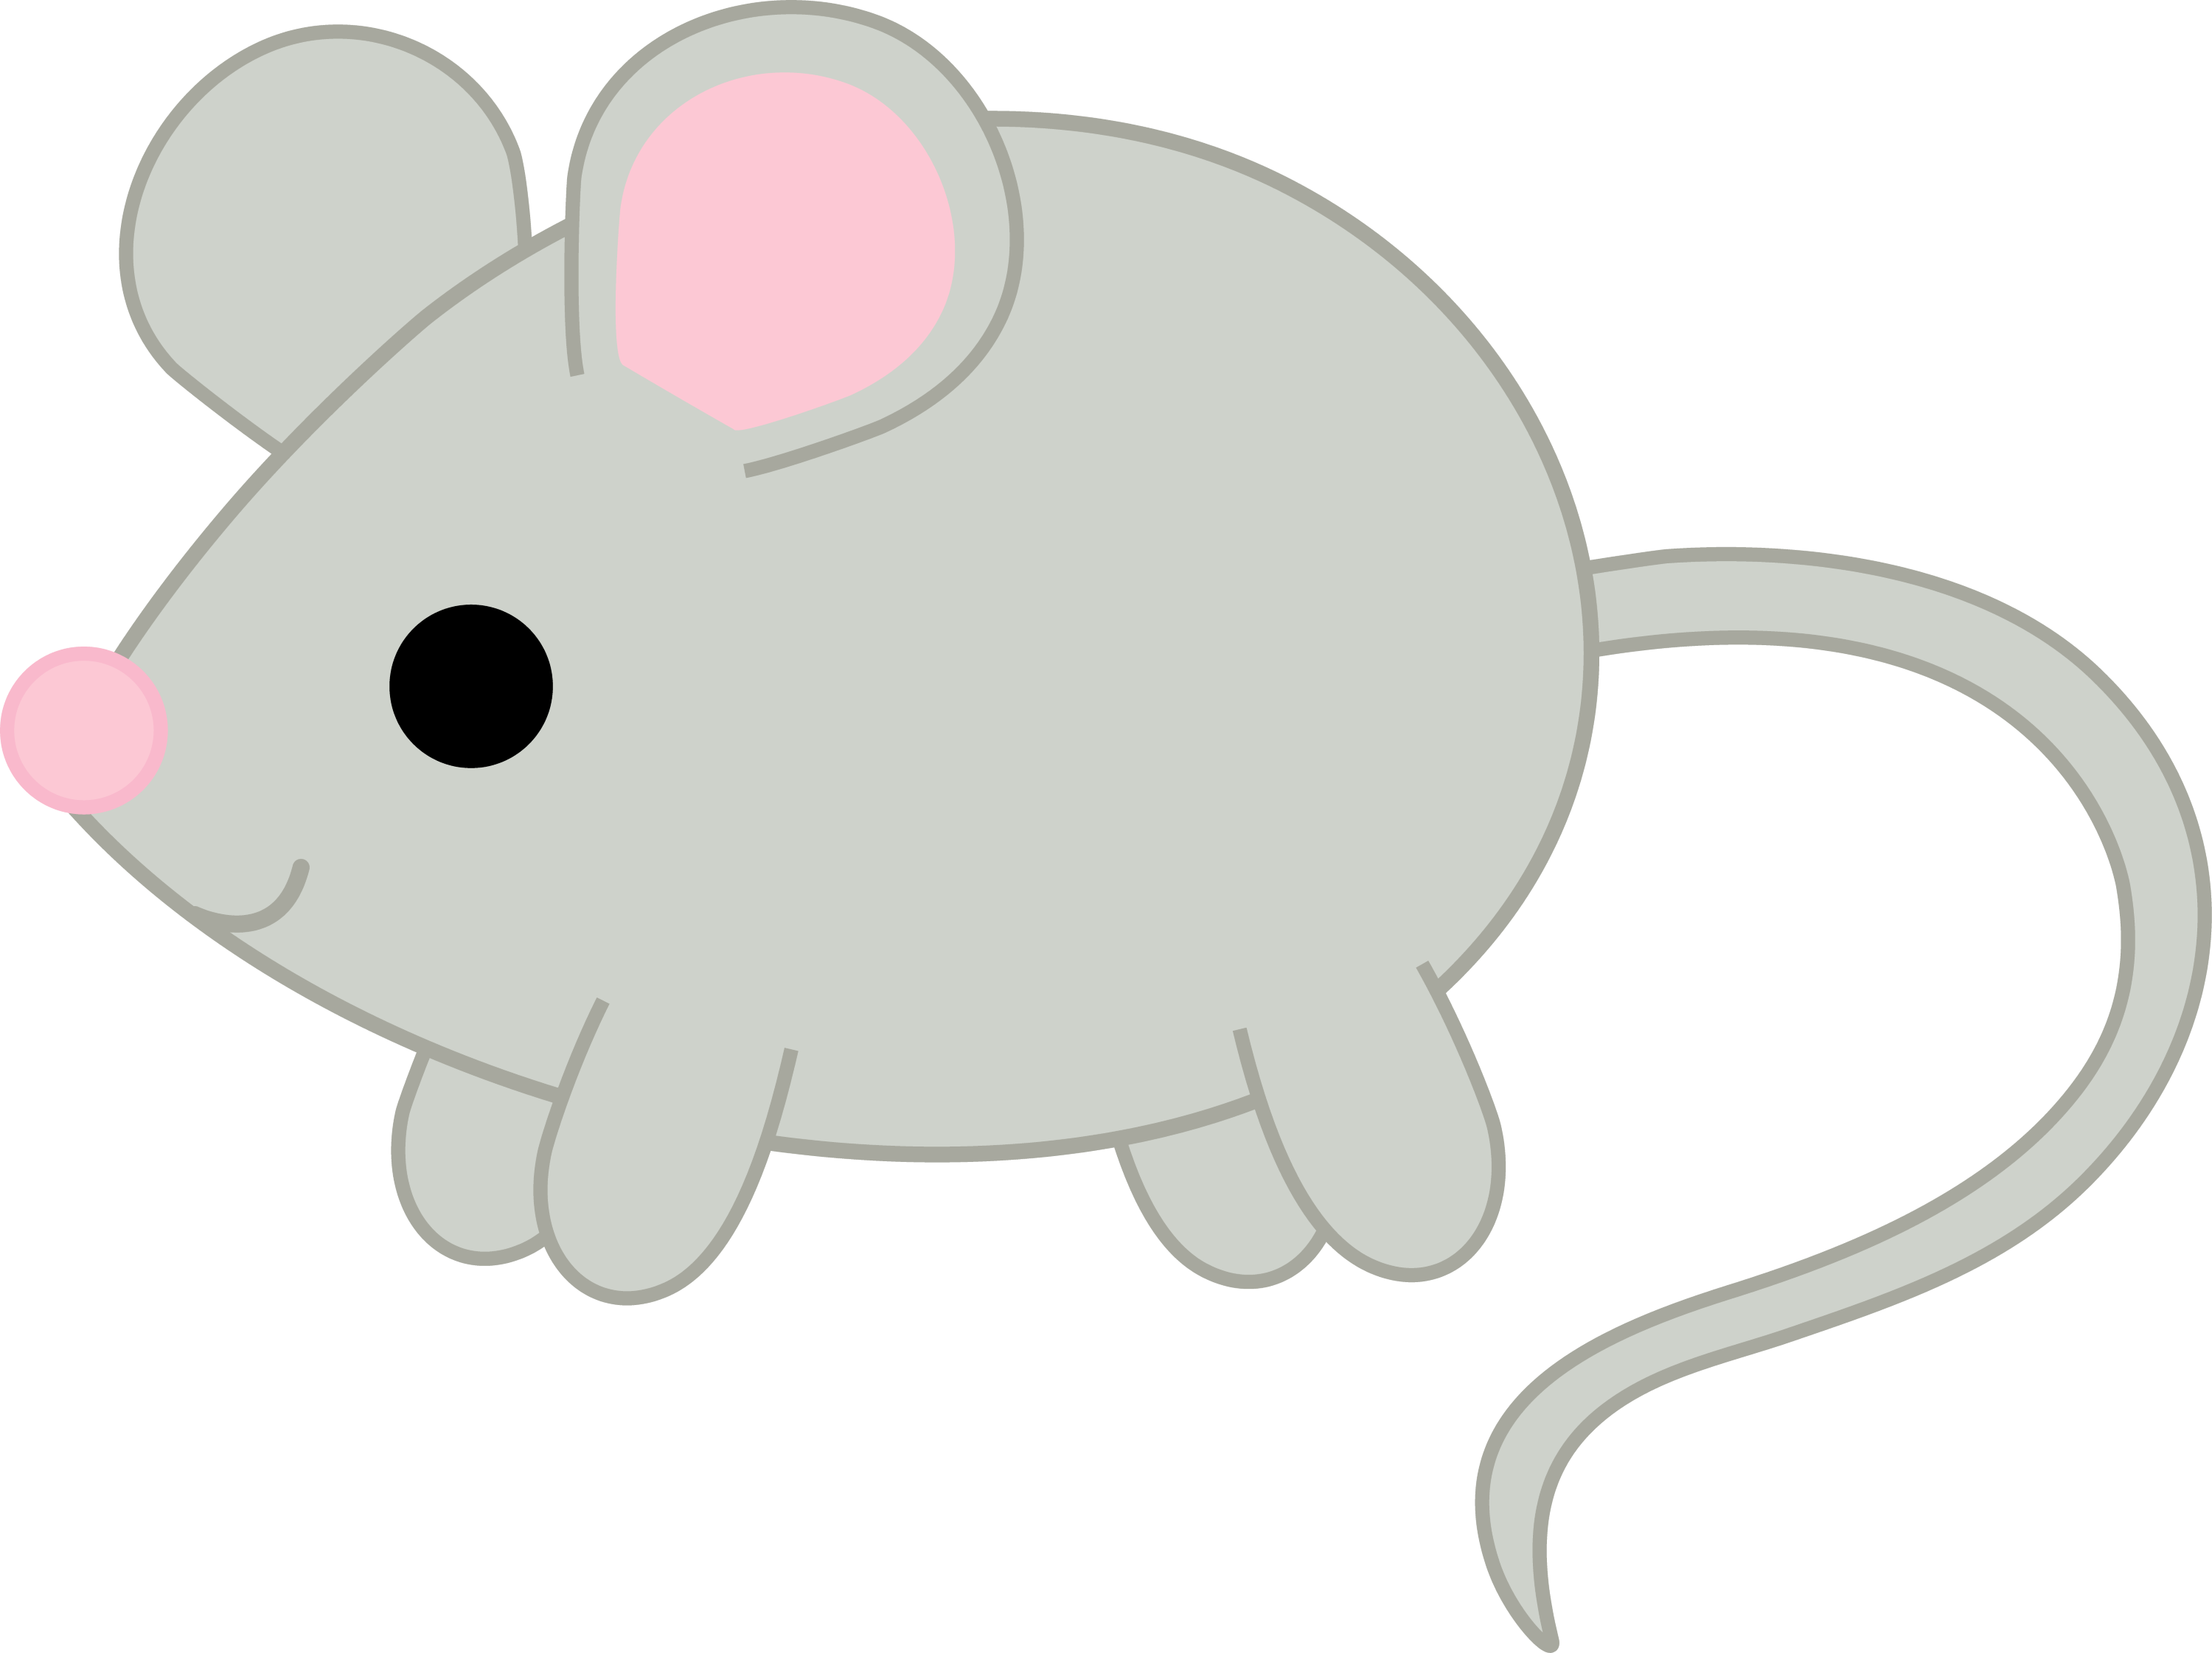 mouse house clipart - photo #44